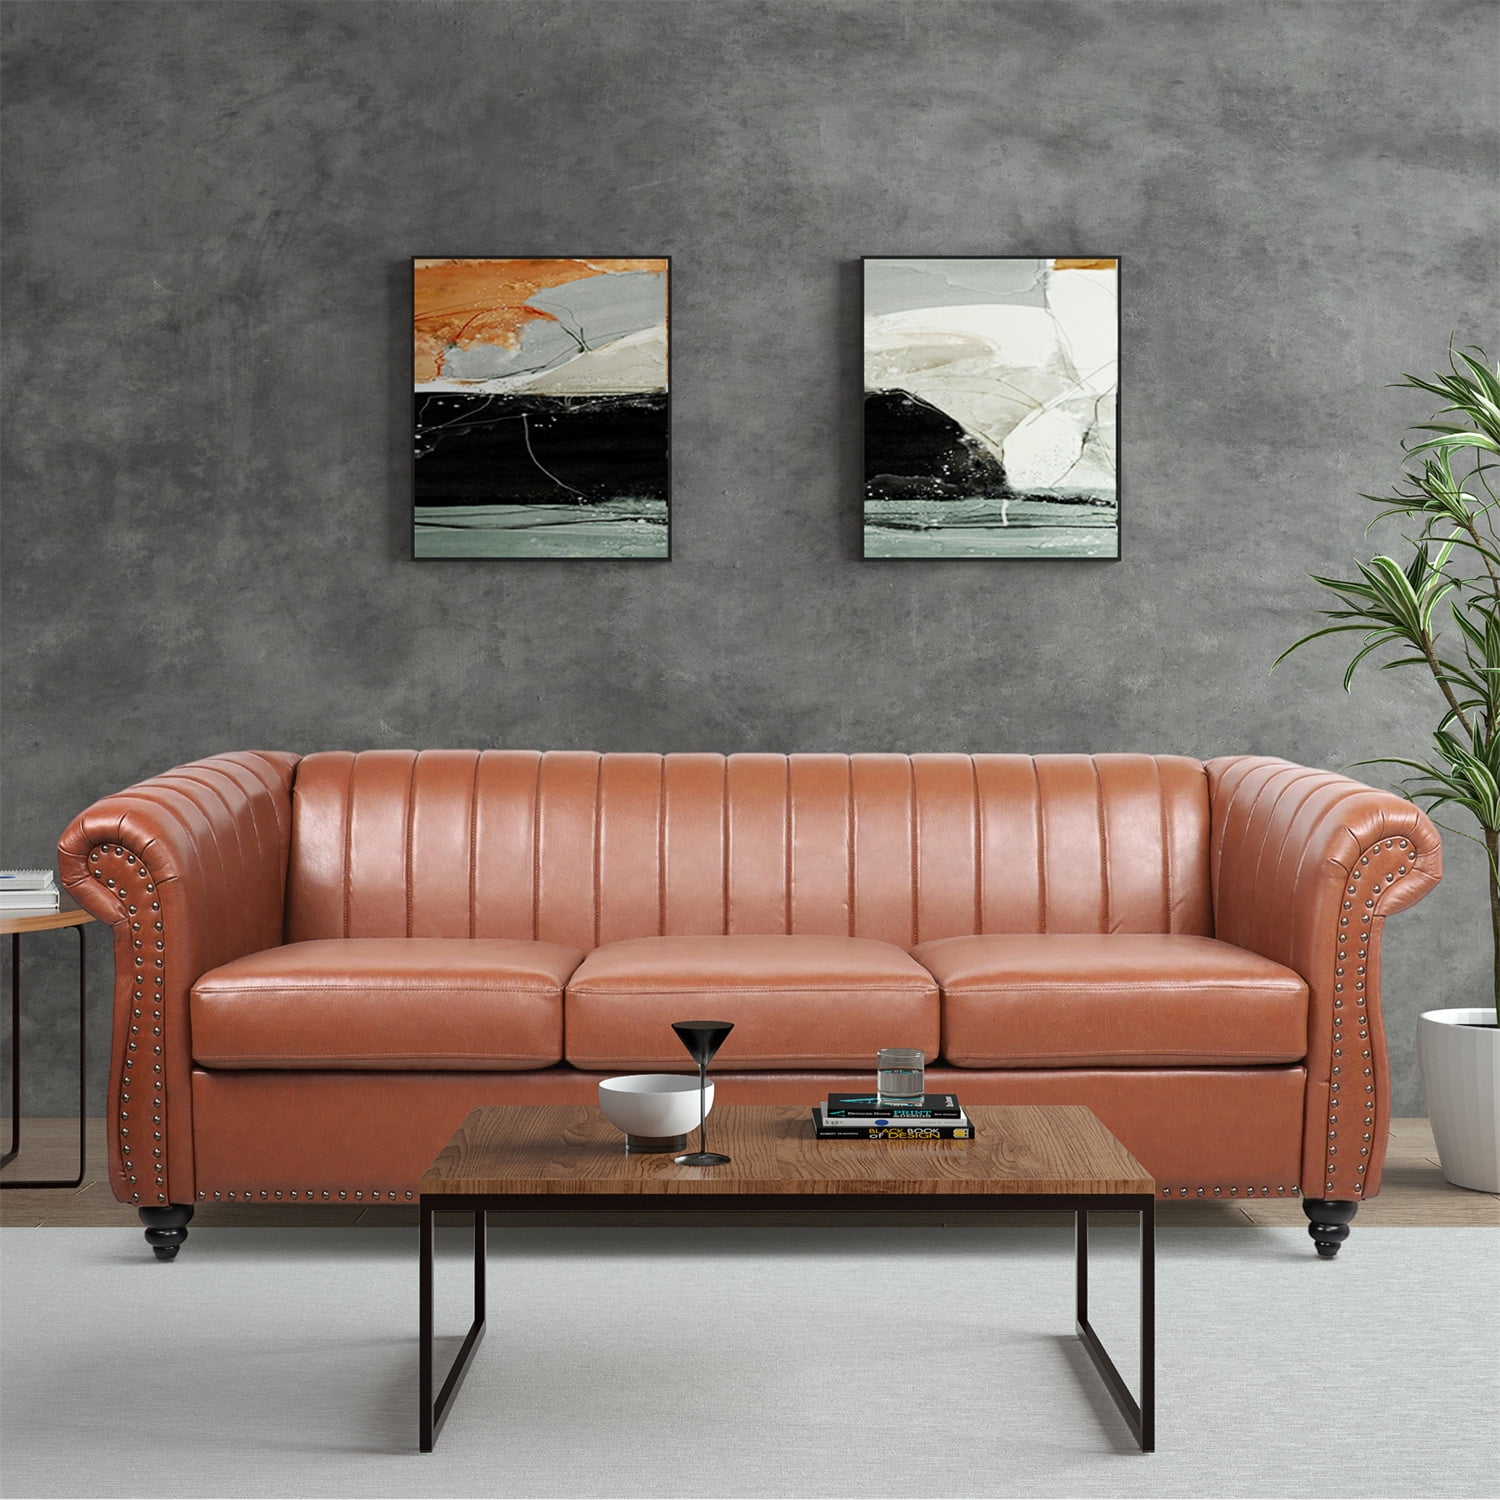 84" Chesterfield Sofa, Modern PU Leather Upholstered 3-Seater Sofa with Scrolled Arms and Nailhead Decoration Oversized Accent Sofa with Padded Cushion & Solid Wood Legs for Living Room, Bronze - Walmart.com